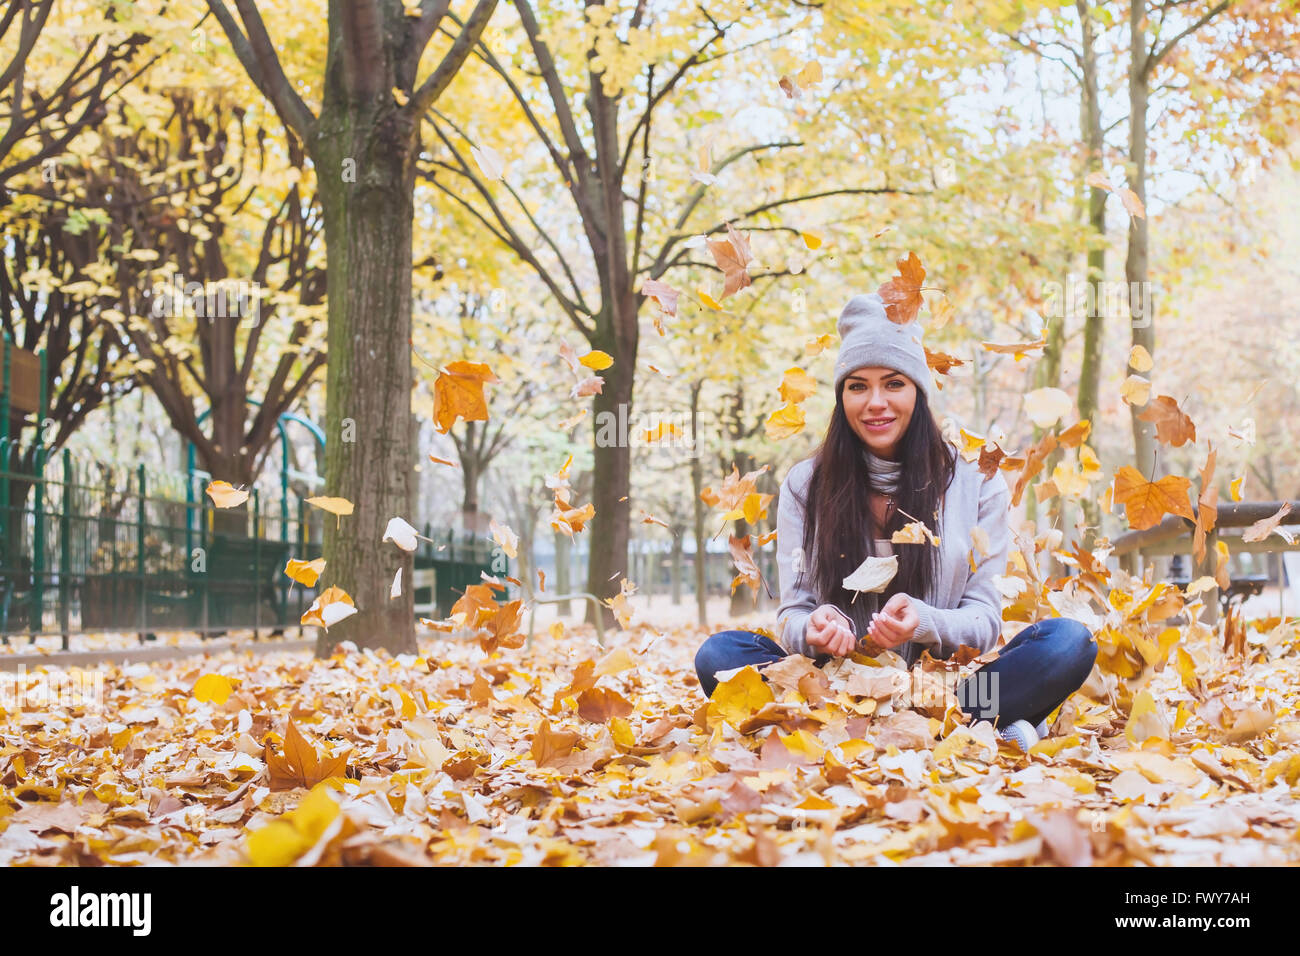 autumn park, beautiful smiling woman and falling yellow leaves Stock Photo